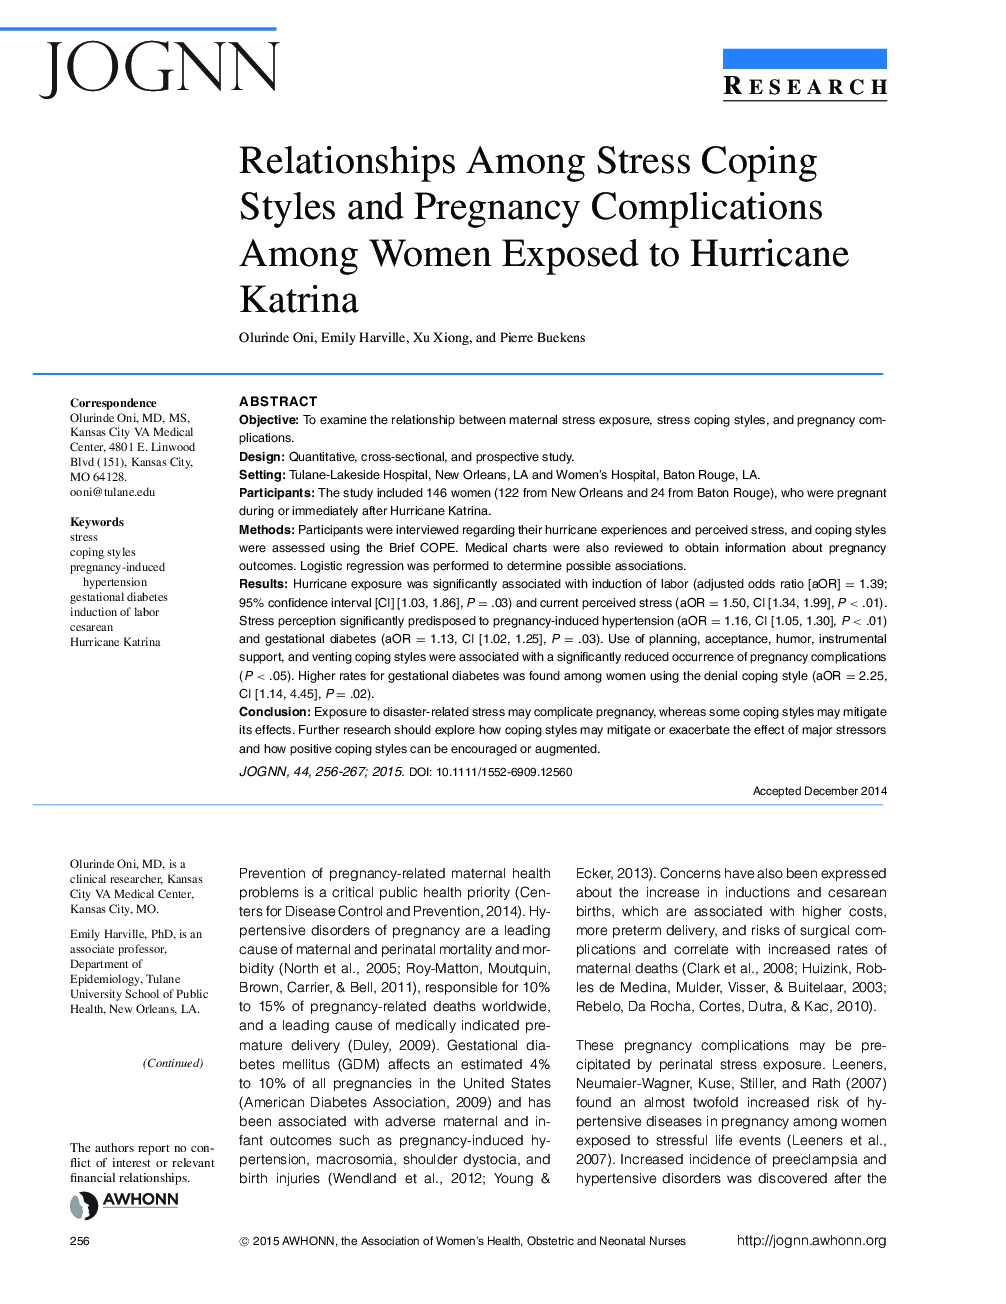 Relationships Among Stress Coping Styles and Pregnancy Complications Among Women Exposed to Hurricane Katrina